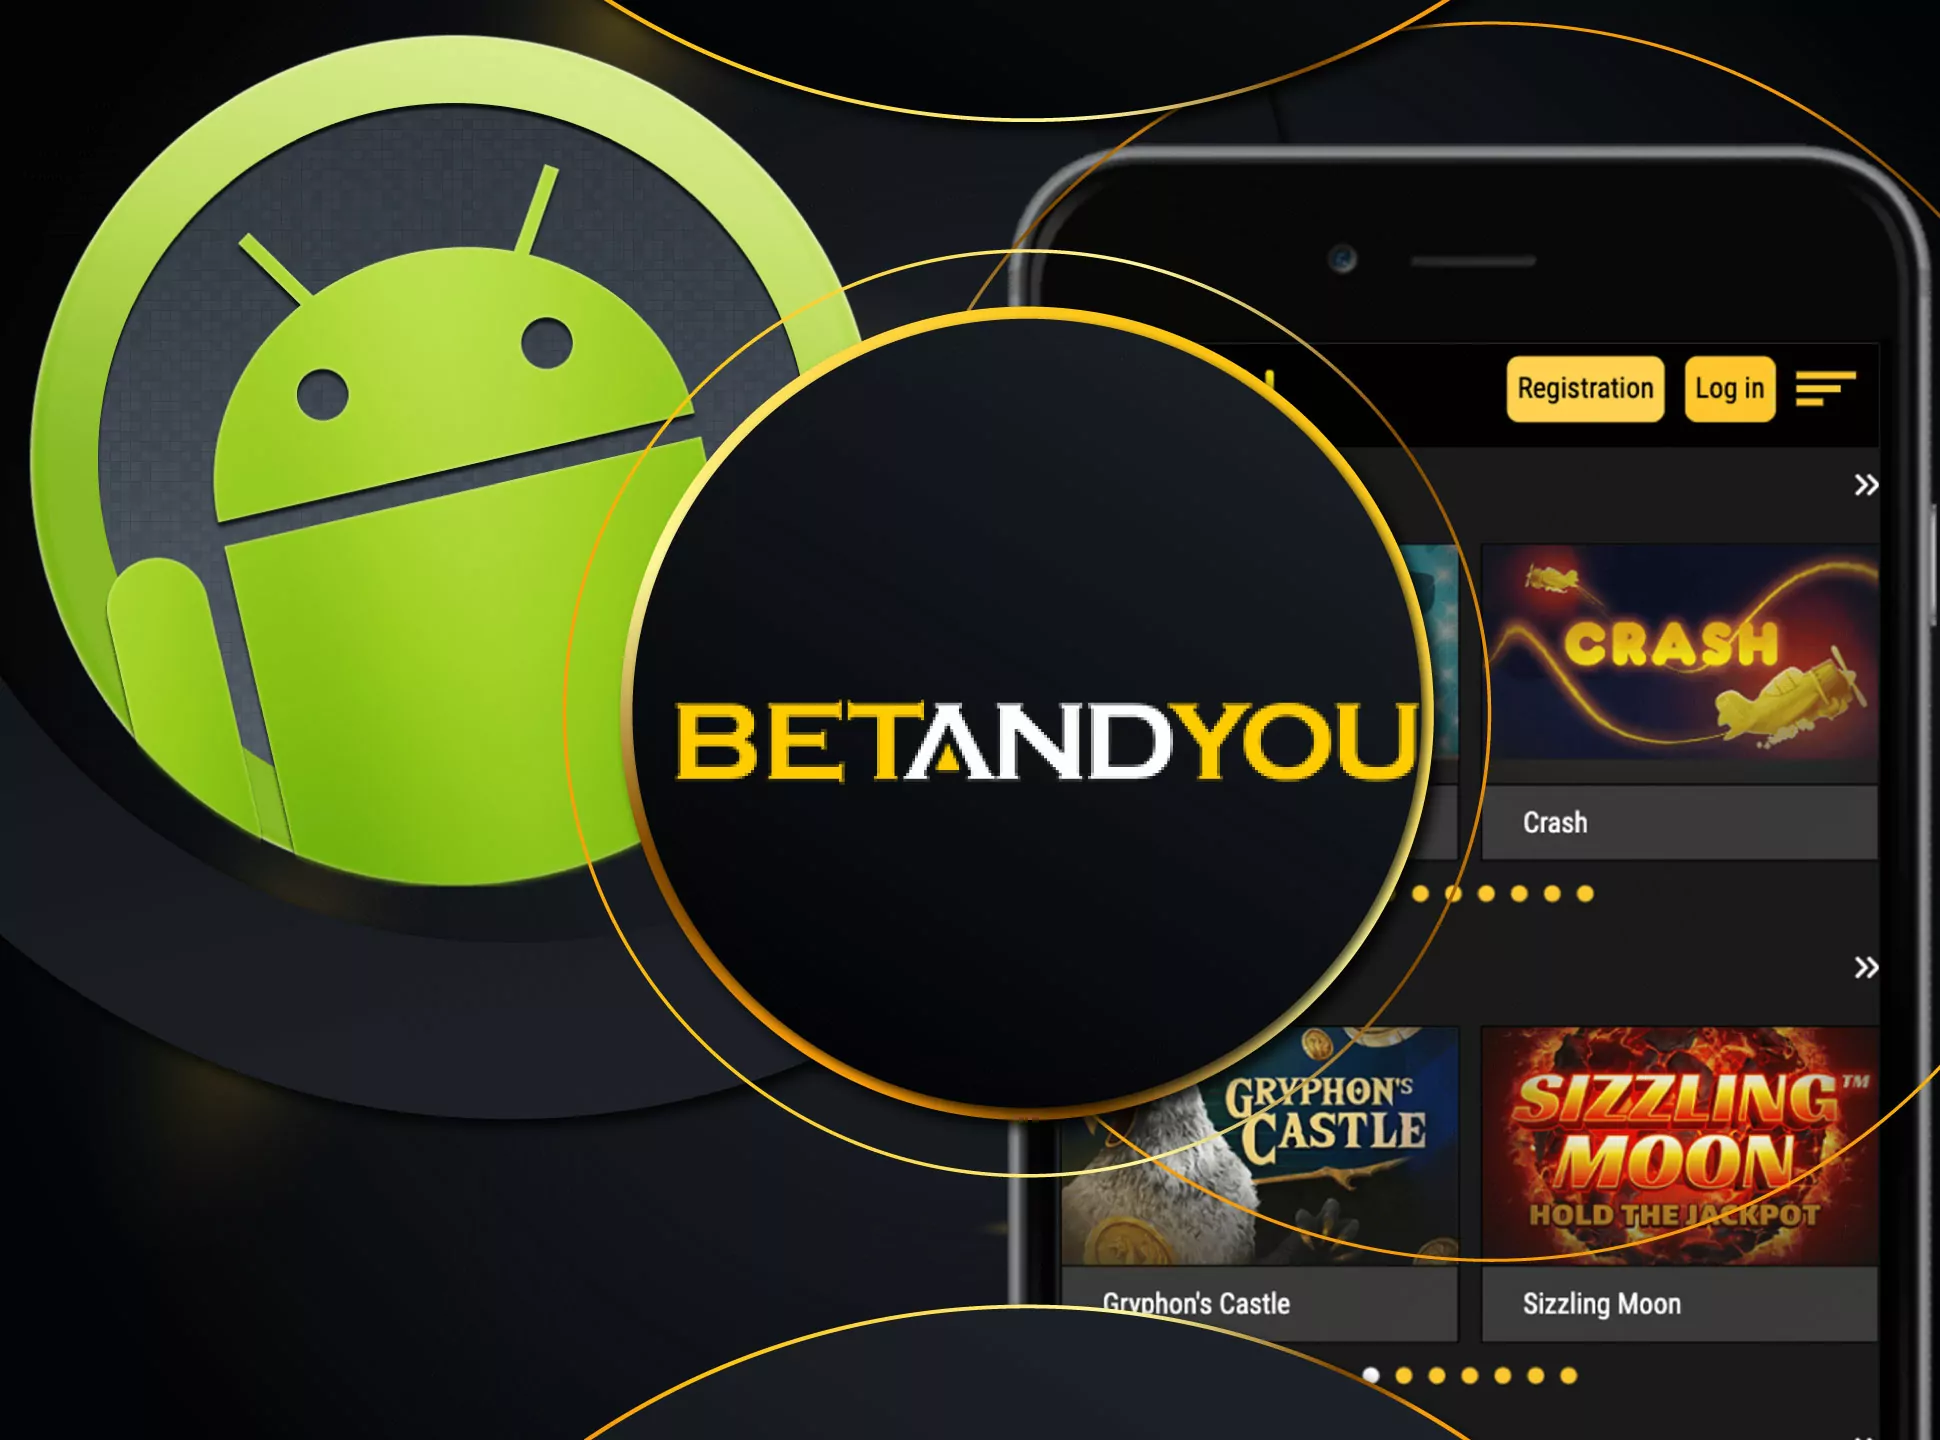 Install Betandyou app on any of your Android devices.